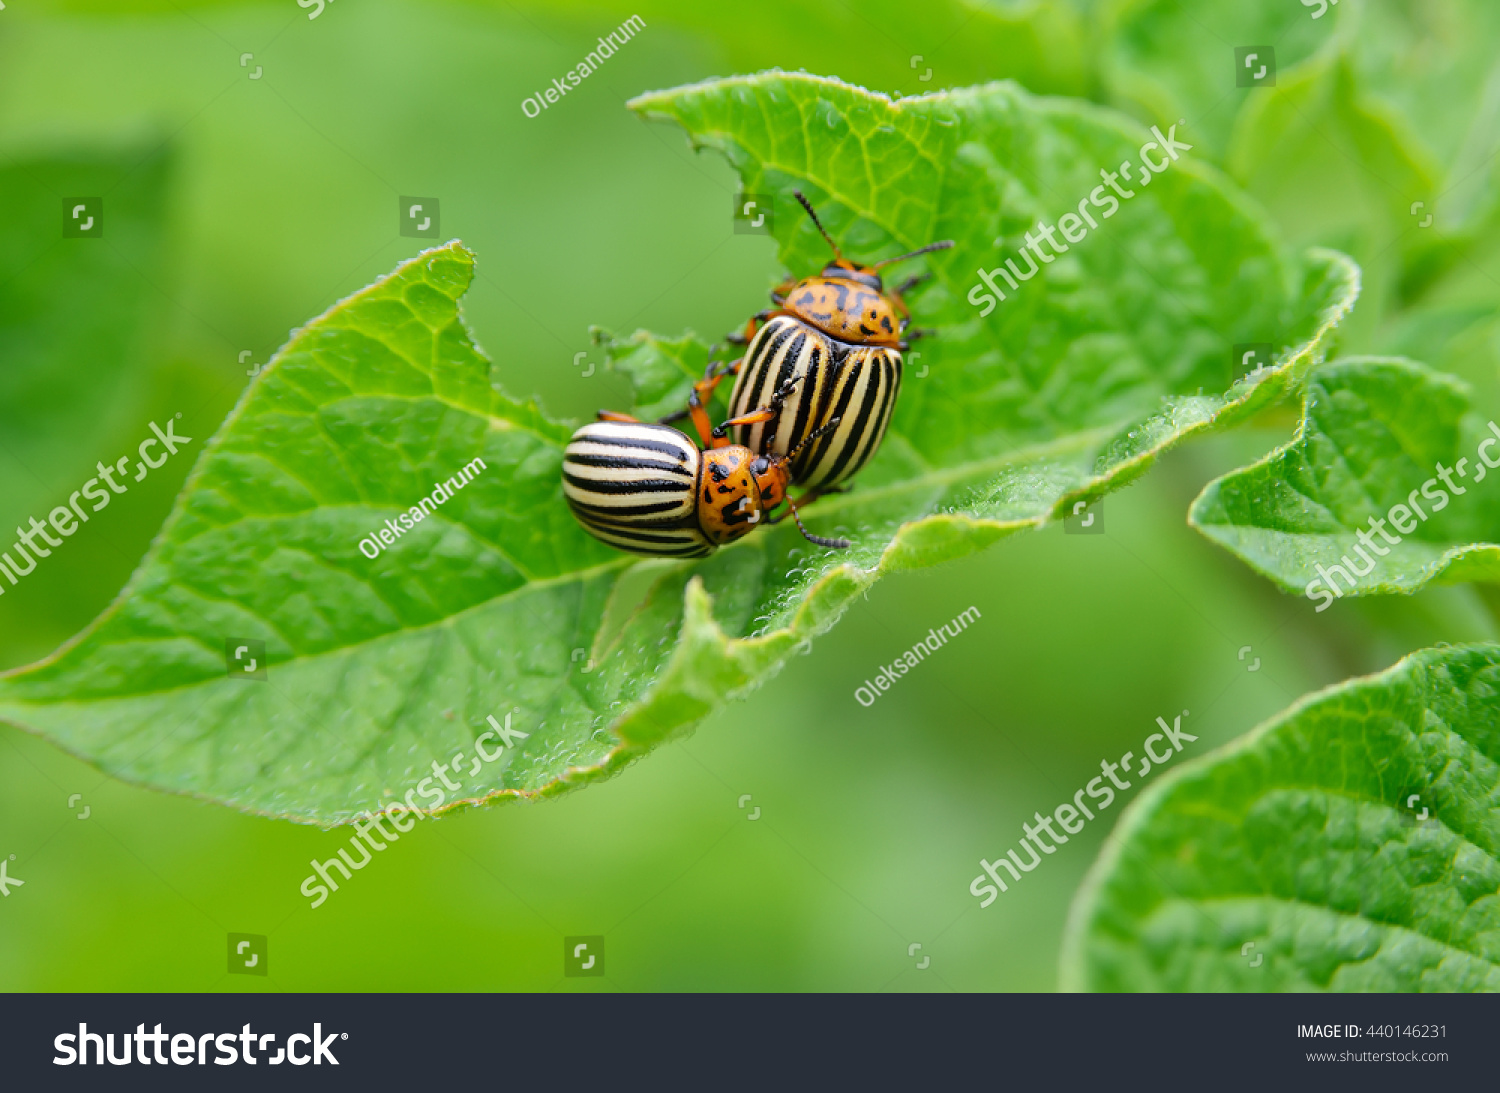 Colorado beetle eats a potato leaves young. Pests destroy a crop in the field. Parasites in wildlife and agriculture. #440146231